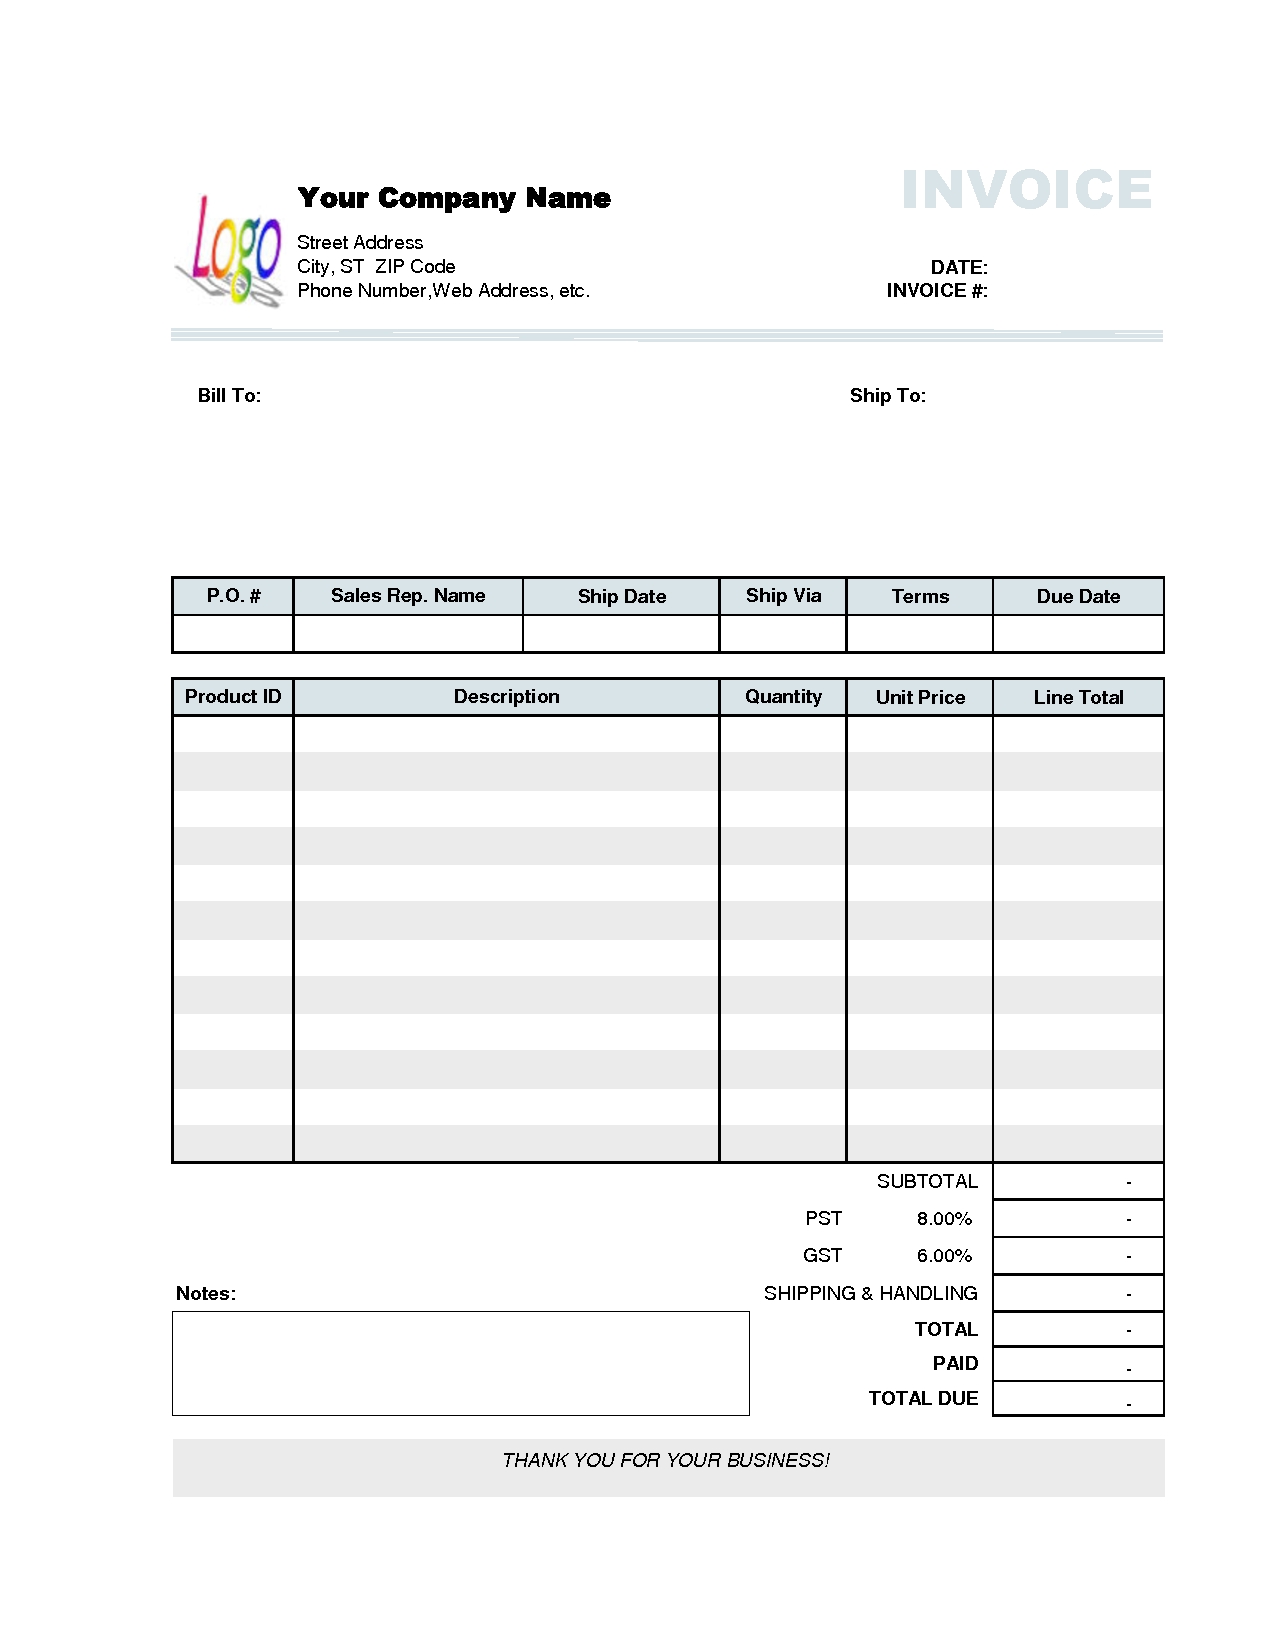 9 printable invoice templates samples and problems of invoicing business invoice sample